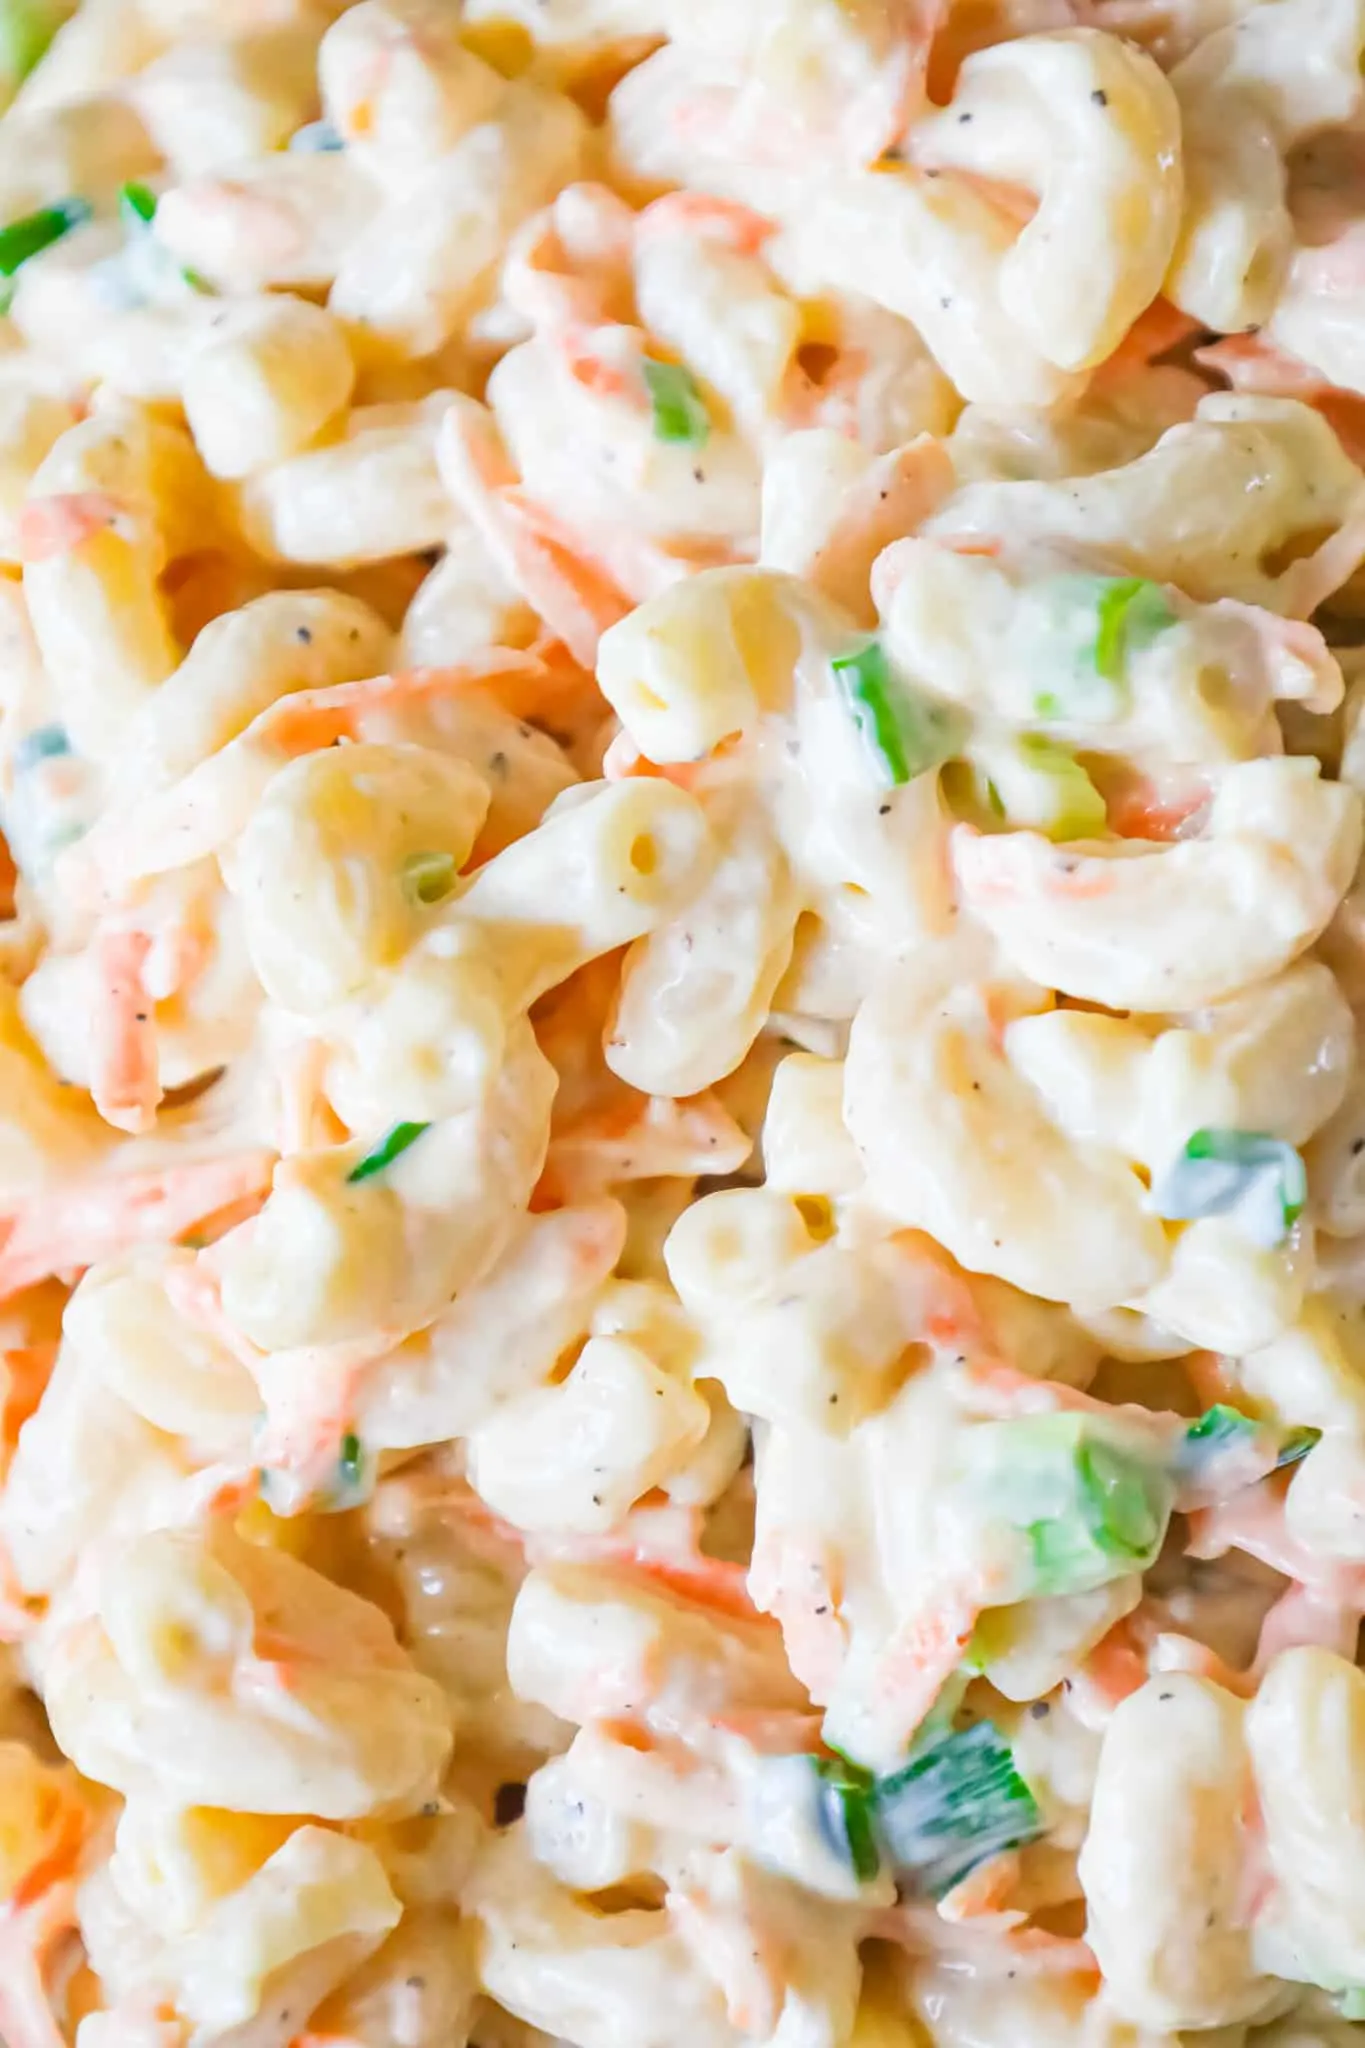 Hawaiian Macaroni Salad is a creamy pasta salad recipe loaded with grated carrots, yellow onion and chopped green onion.